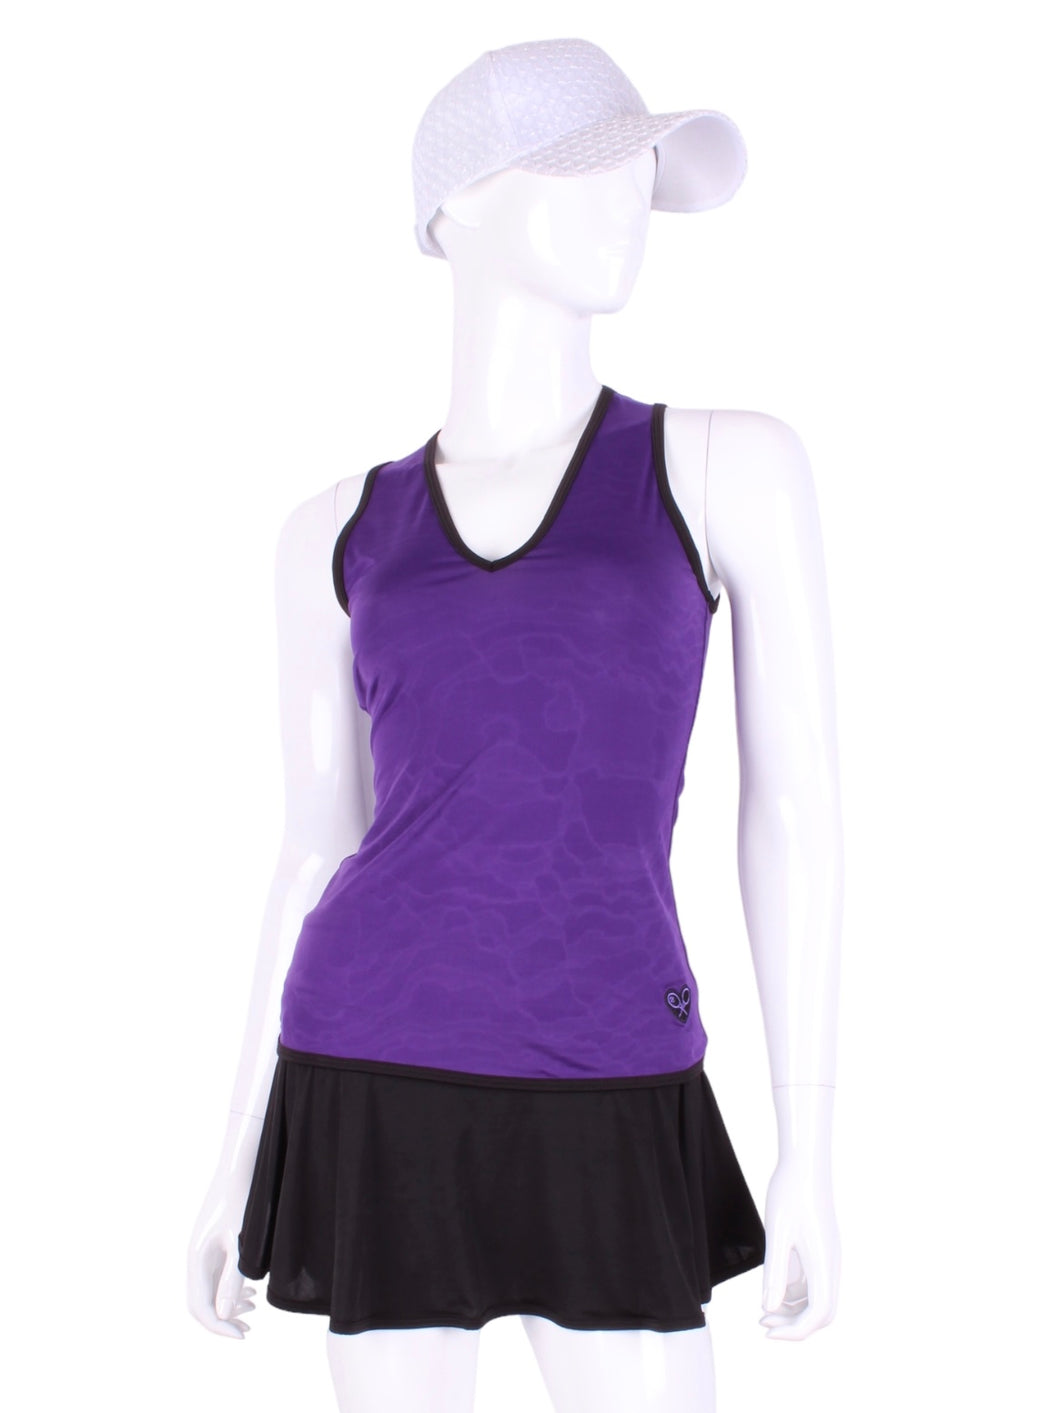 Straight Back Vee Tank Purple w/ Black Trim. The simply elegant Vee Tank has a little vee in the front and a straight back.  Designed by a tennis player for comfort AND luxury - the pattern is made for a real woman’s body with curves and all!  The material is stretchy and soft.  As with all of our apparel - it’s designed and hand made in Downtown Los Angeles - from imported fabric.